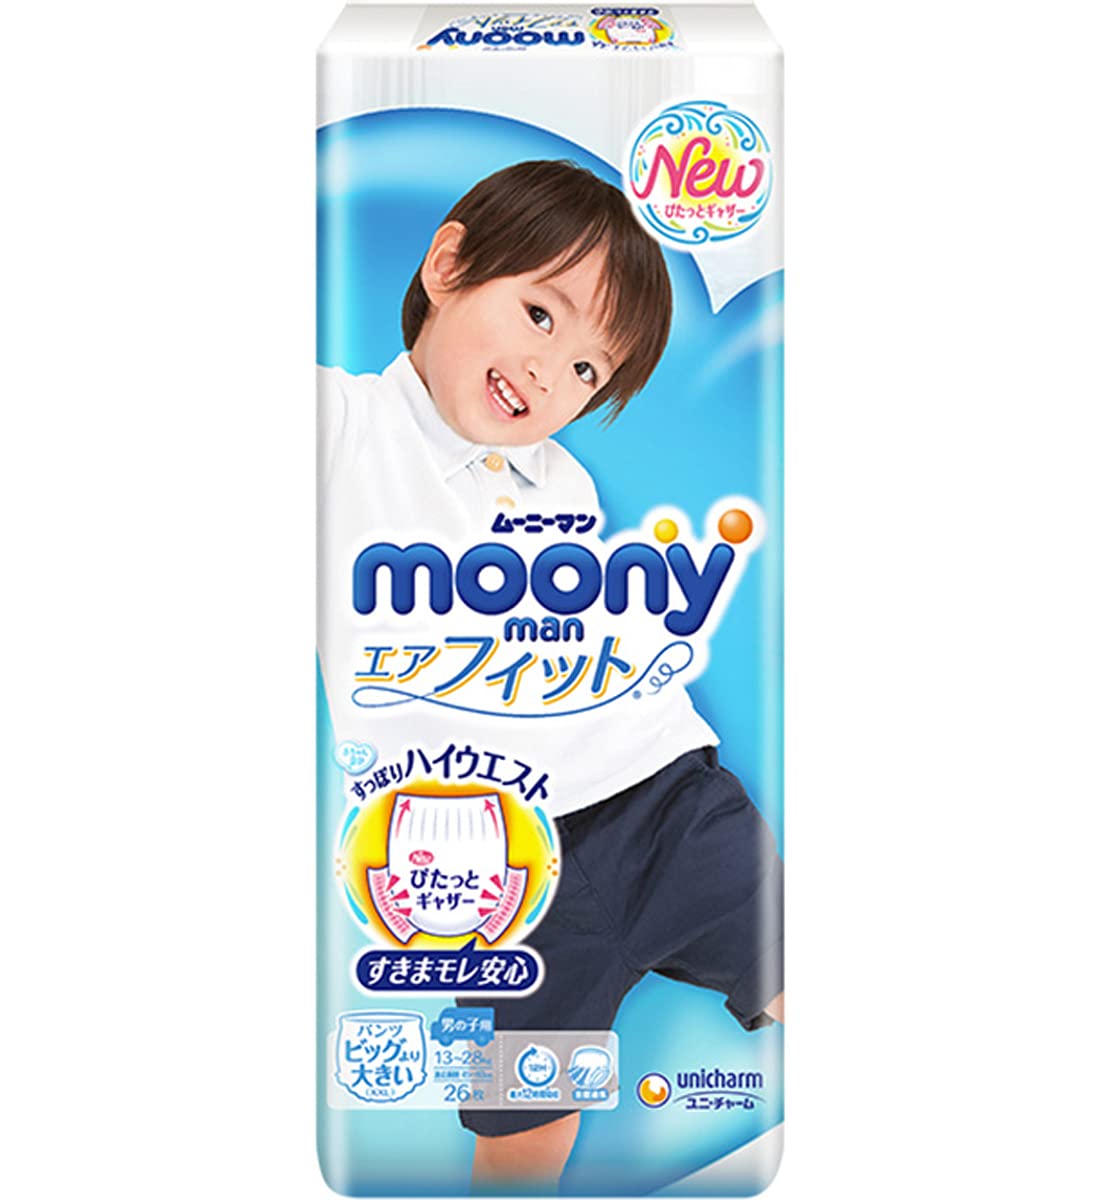 Americas Toys Baby Pull Up Pants Size XXL (29-62 lb) Boys 26 count - Moony Pants Bundle with Americas Toys Wipes - Japanese Diapers - 